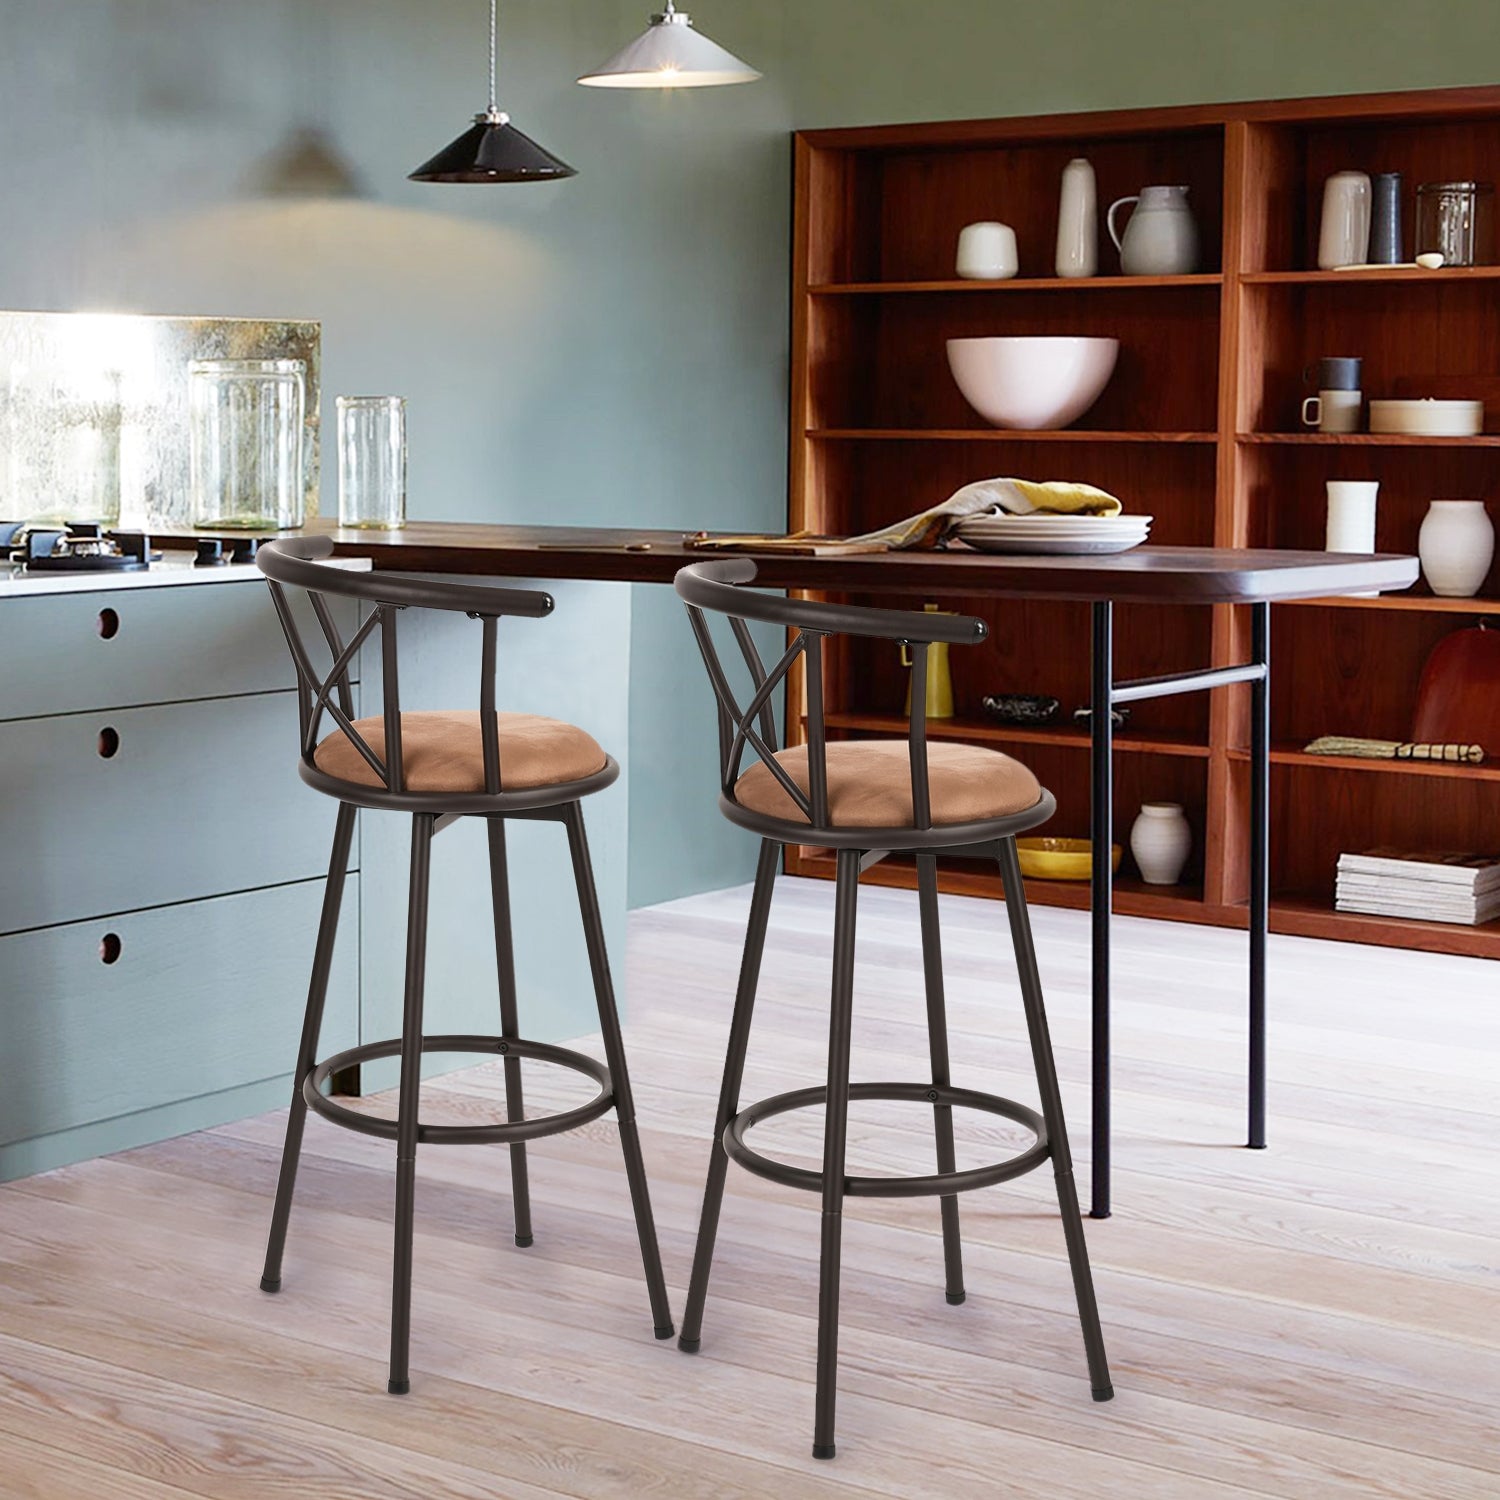 Set of 2 industrial style kitchen bar stools with metal legs 360° seat and footrest - HAILEY BROWN - 77 CM